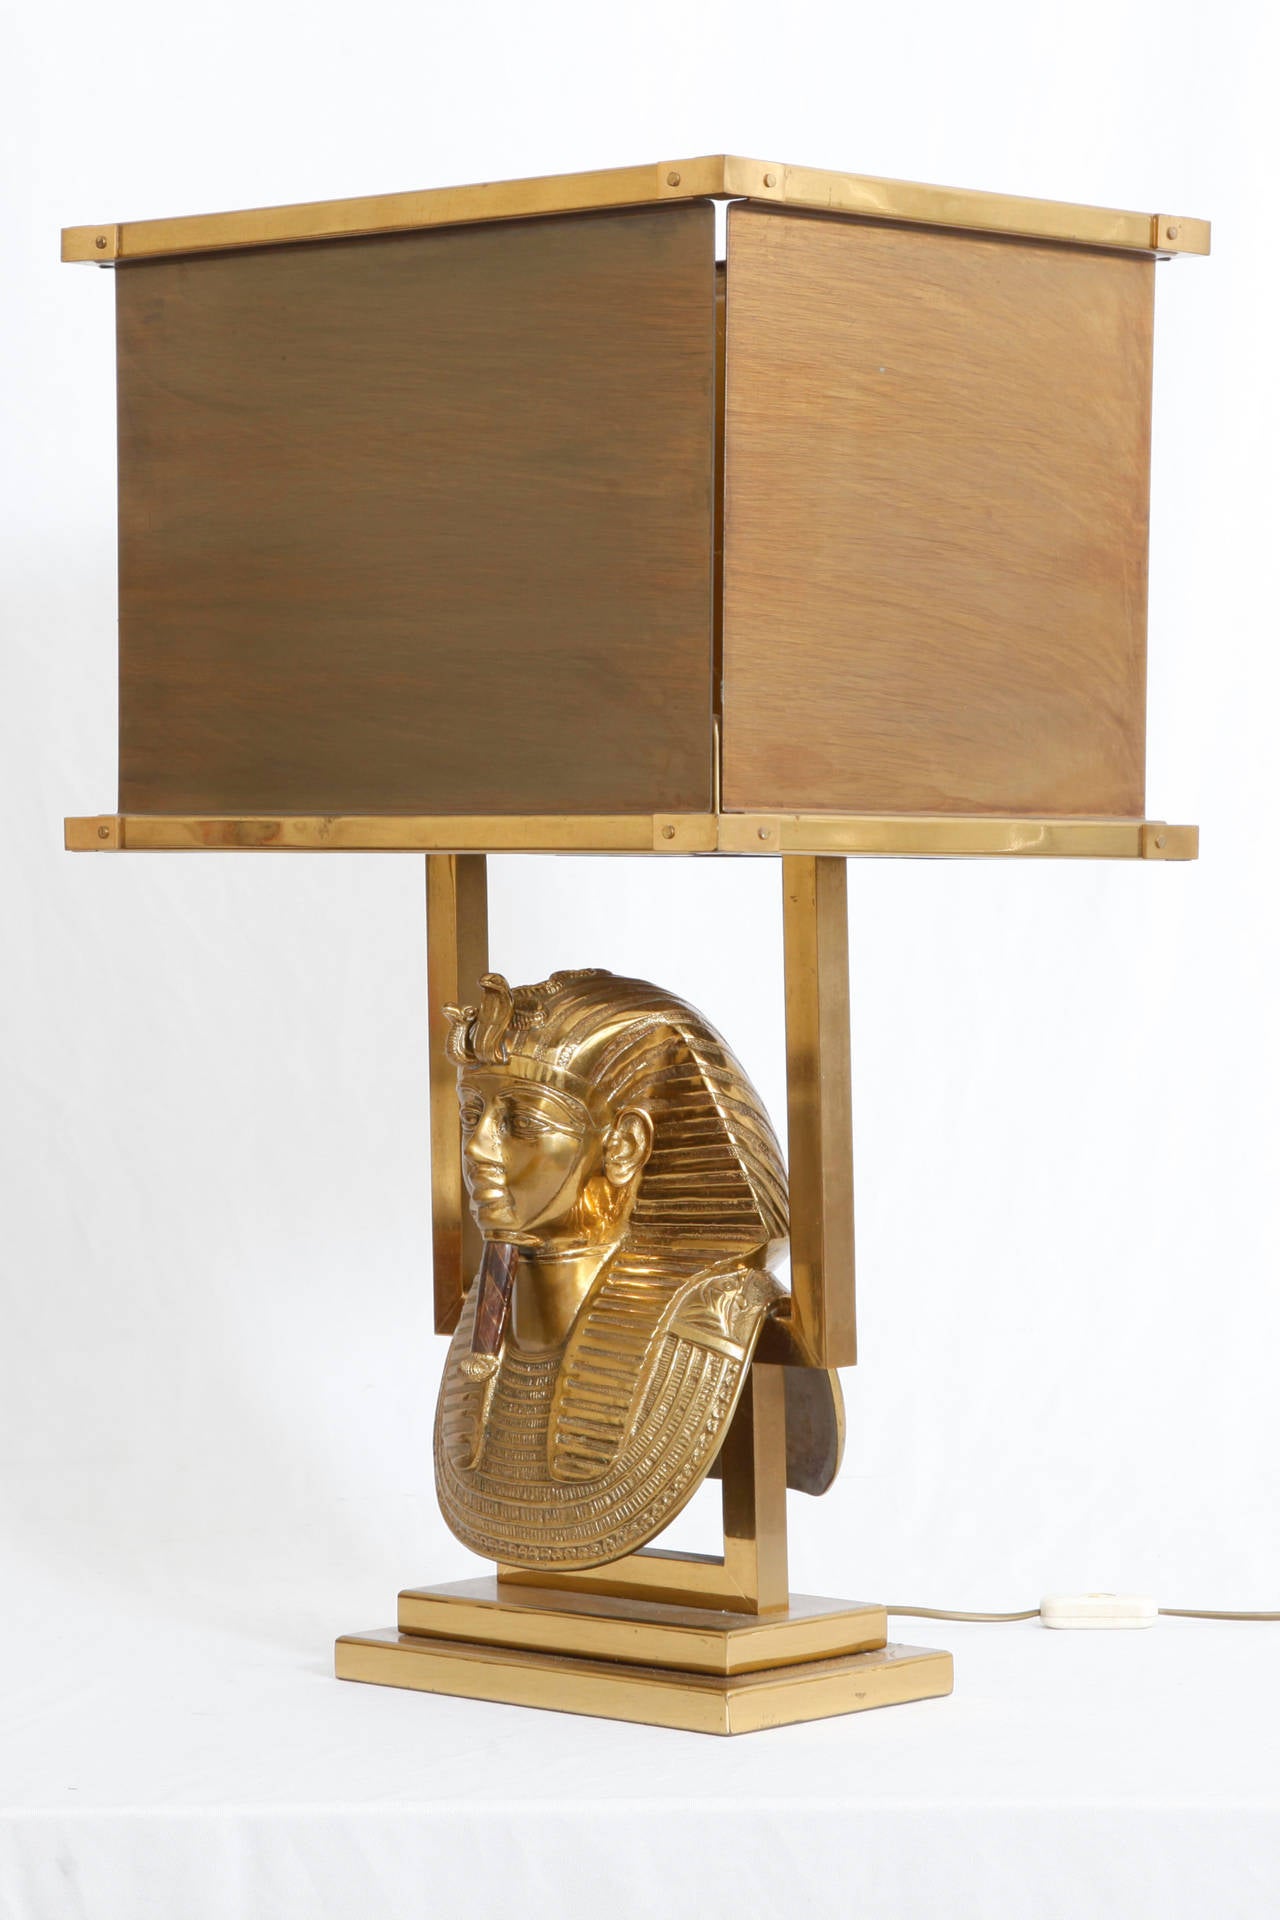 Mid-Century table lamp inspired by the ancient Egyptian Toetanchamon death mask.
The shade is made in solid brass. The mask is bronze. The goatee is in lacquer.
Signed by the artist!
High end version of this lamp. The weight is 24 KG!

We ship